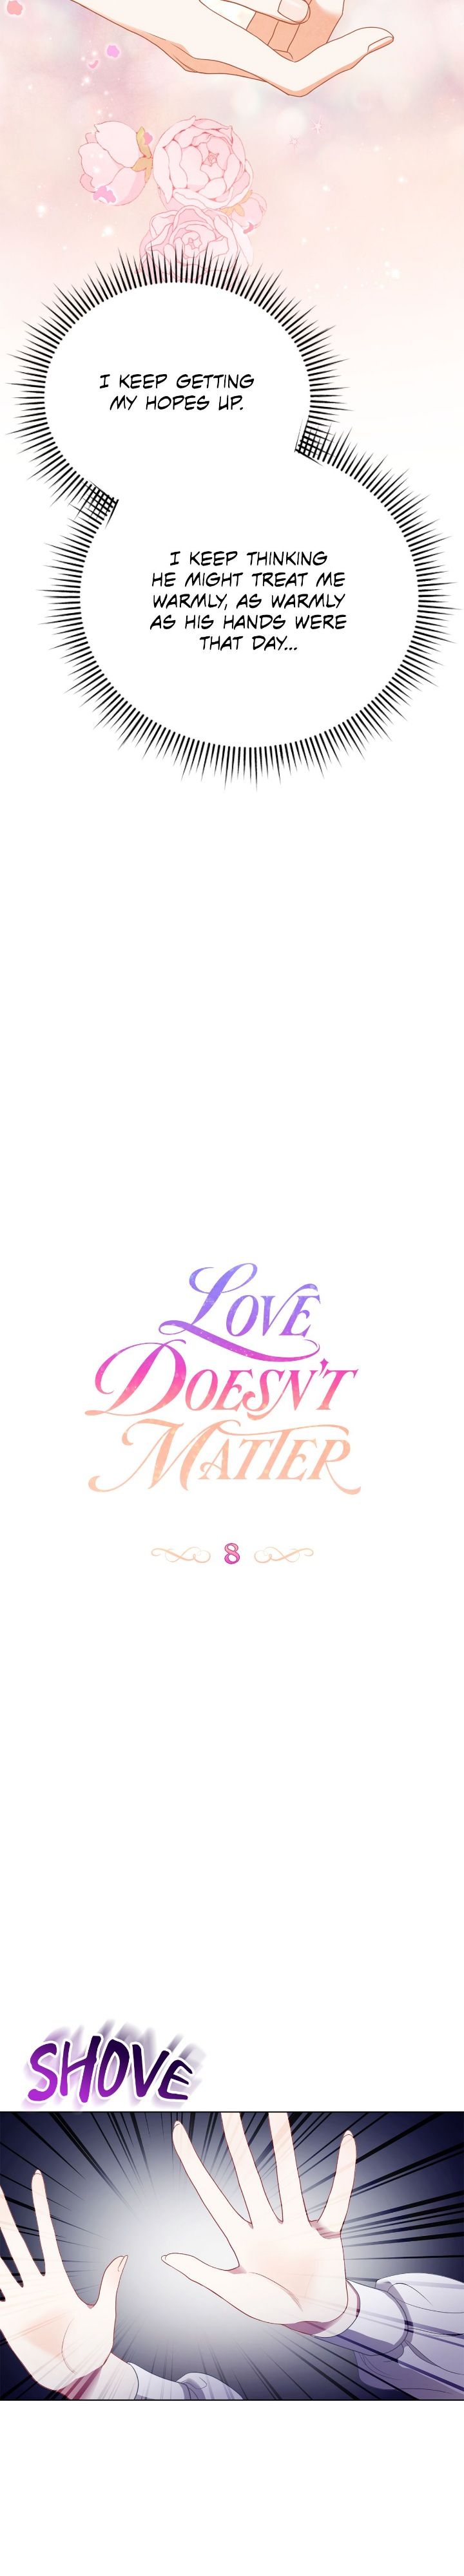 Love Doesn’T Matter - Page 2